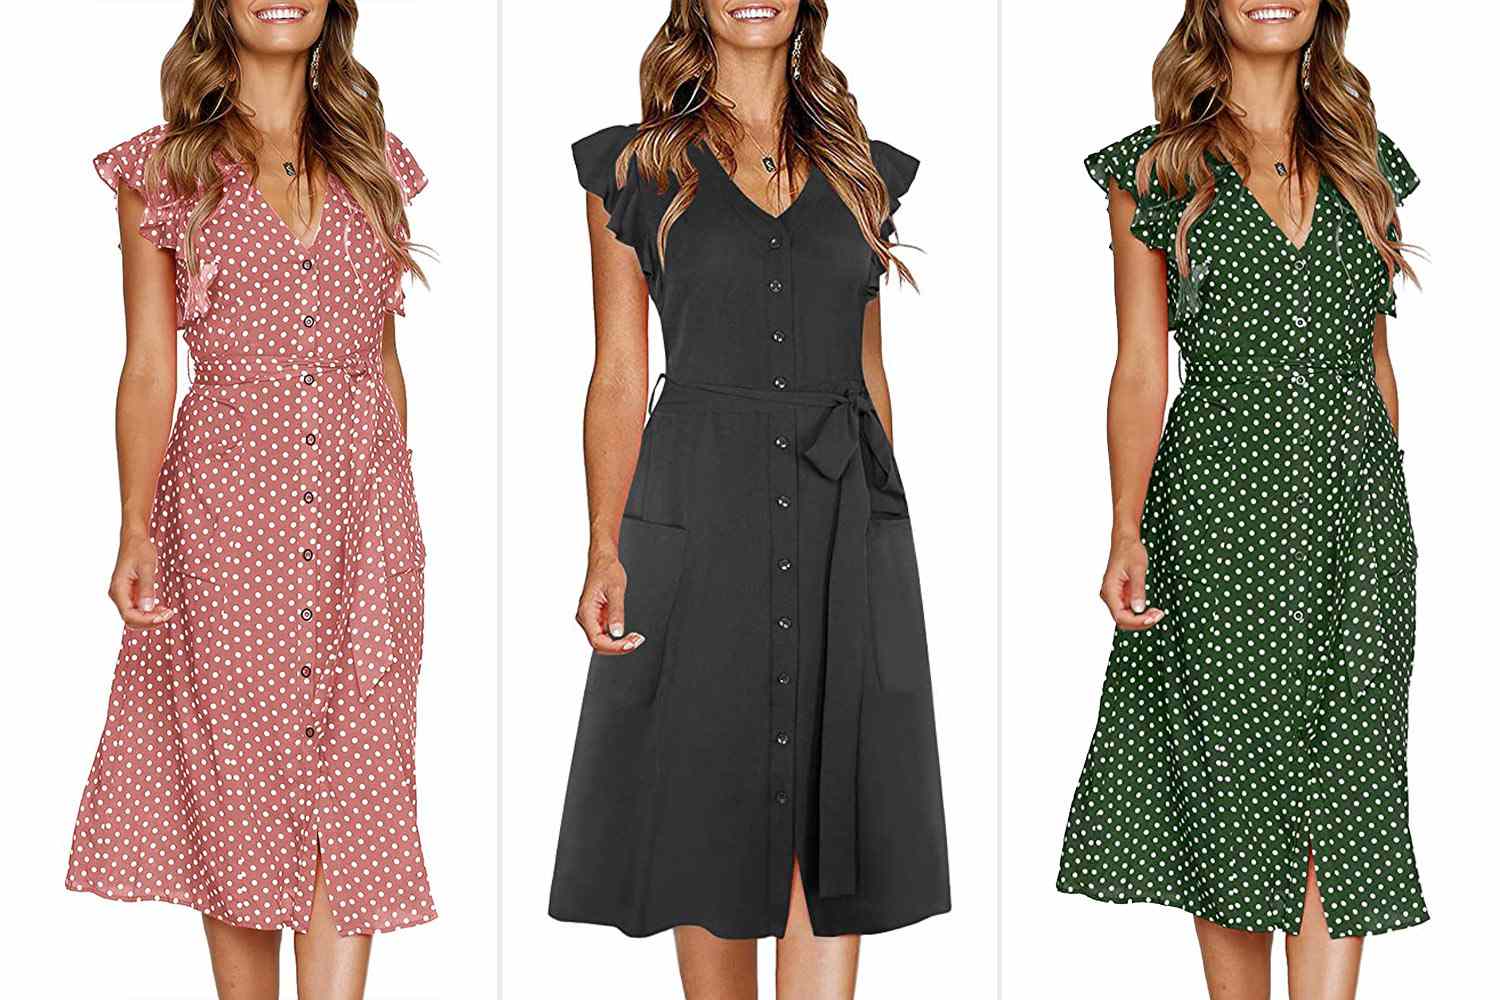 Amazon Shoppers Love The Mitilly Midi Dress for Summertime | PEOPLE.com